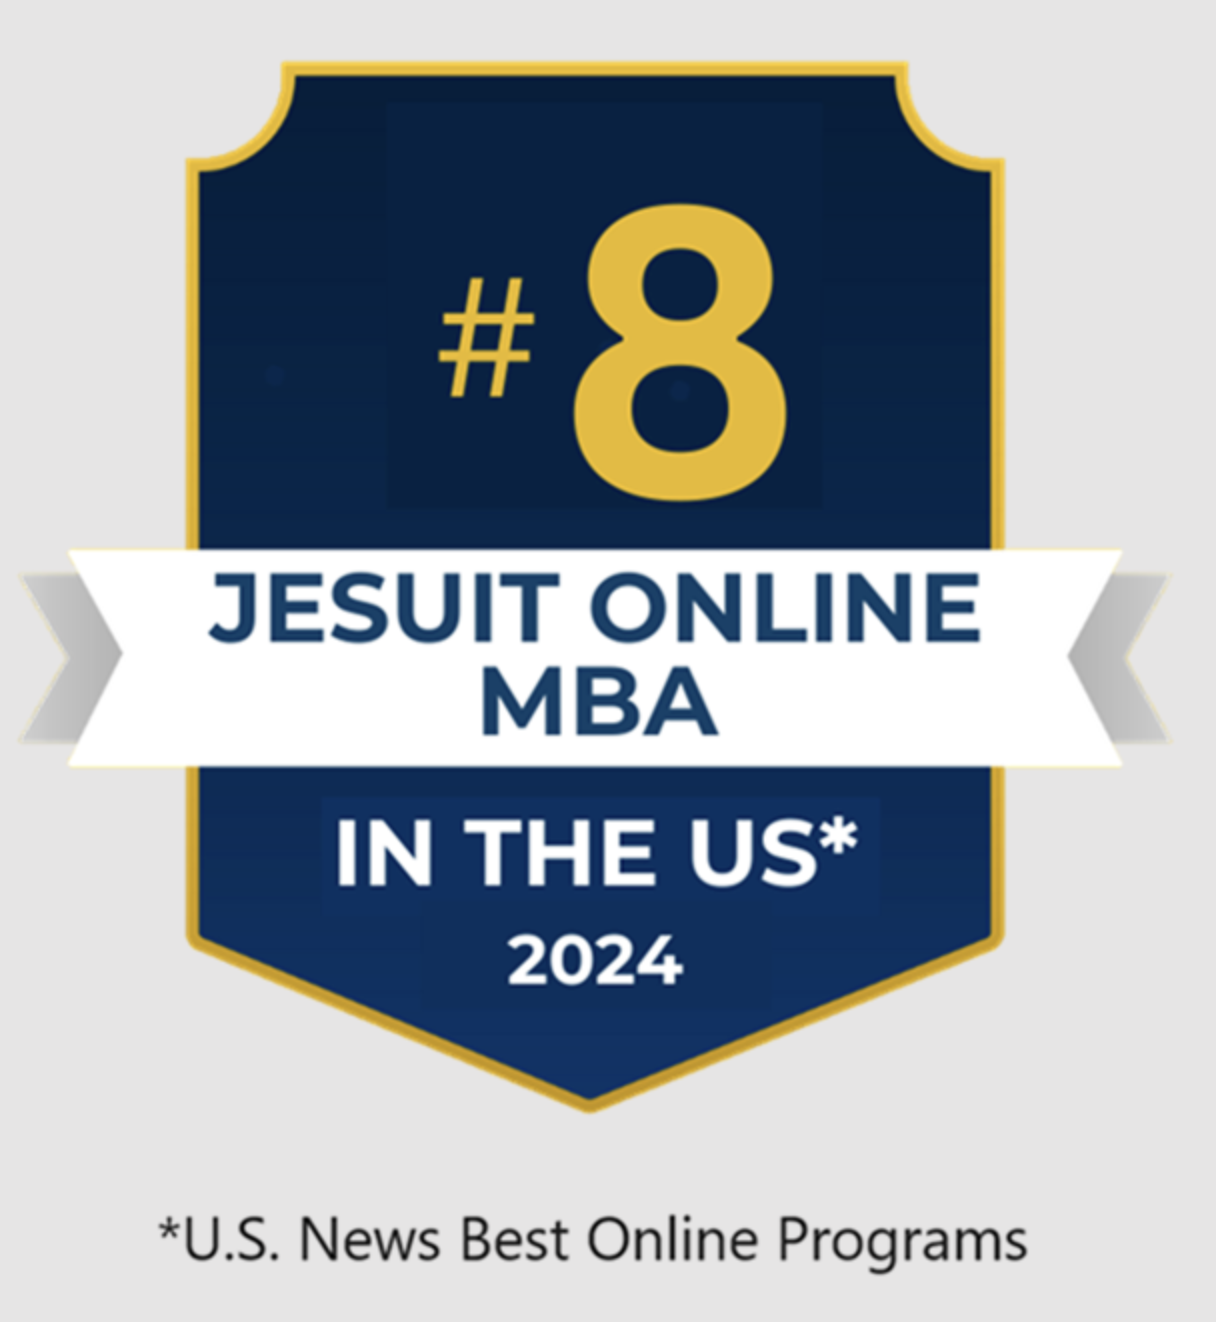 jesuit online mba in the usa